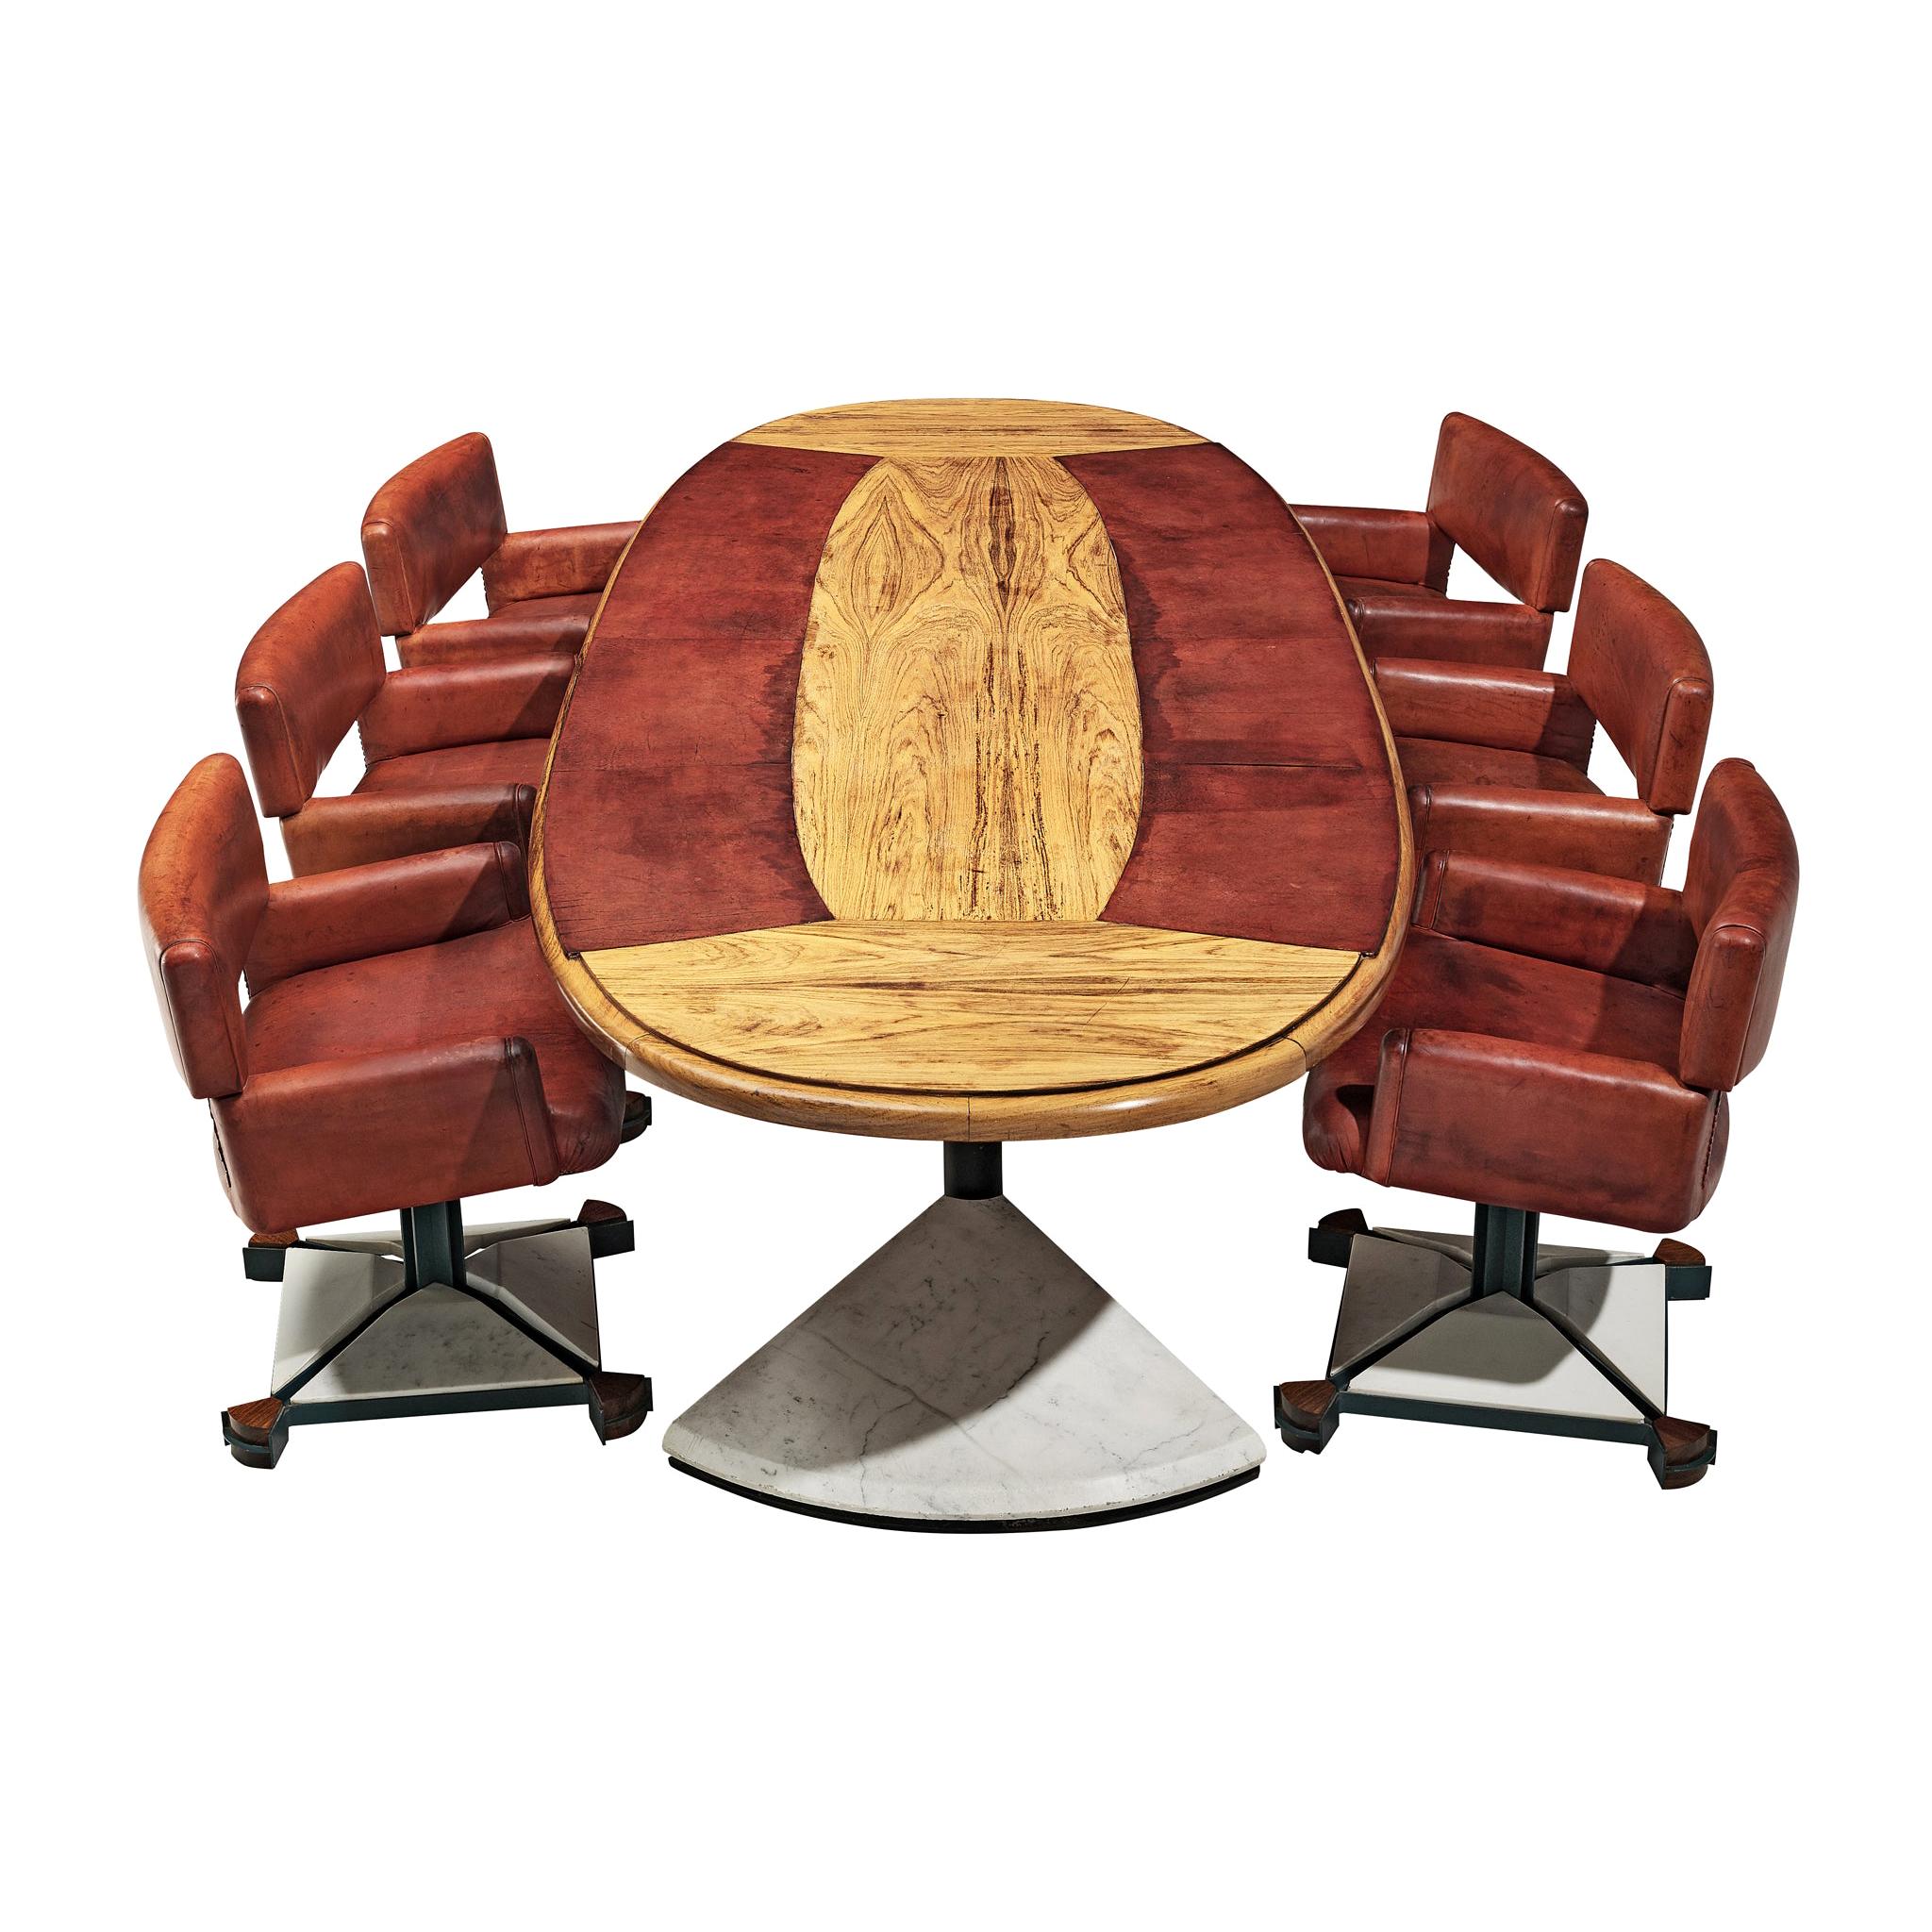 Set of Conference Table and Chairs in Walnut and Red Leather